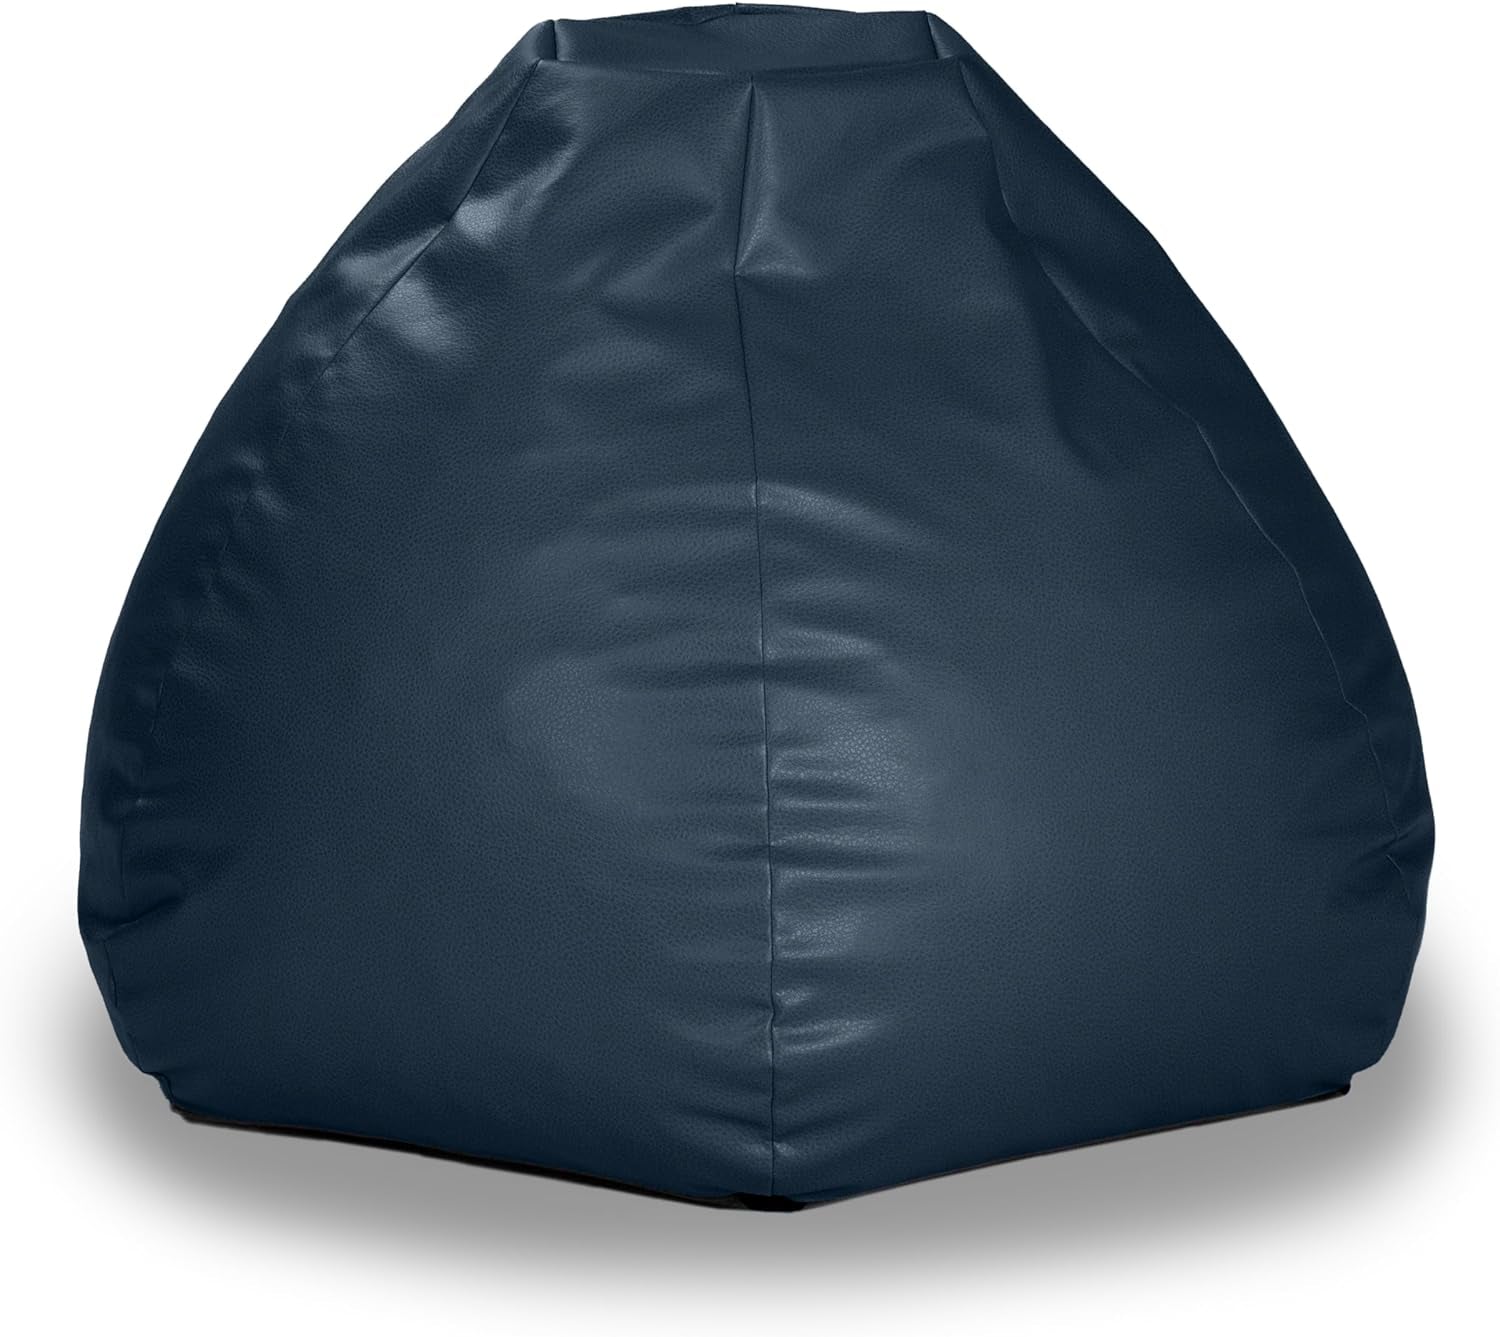 Atrium Collection Pazi Pod - Designer Foam Bean Bag Chair for Home Theaters, Offices, Schools, Reception & Waiting Rooms - Faux Leather - Oxford Blue